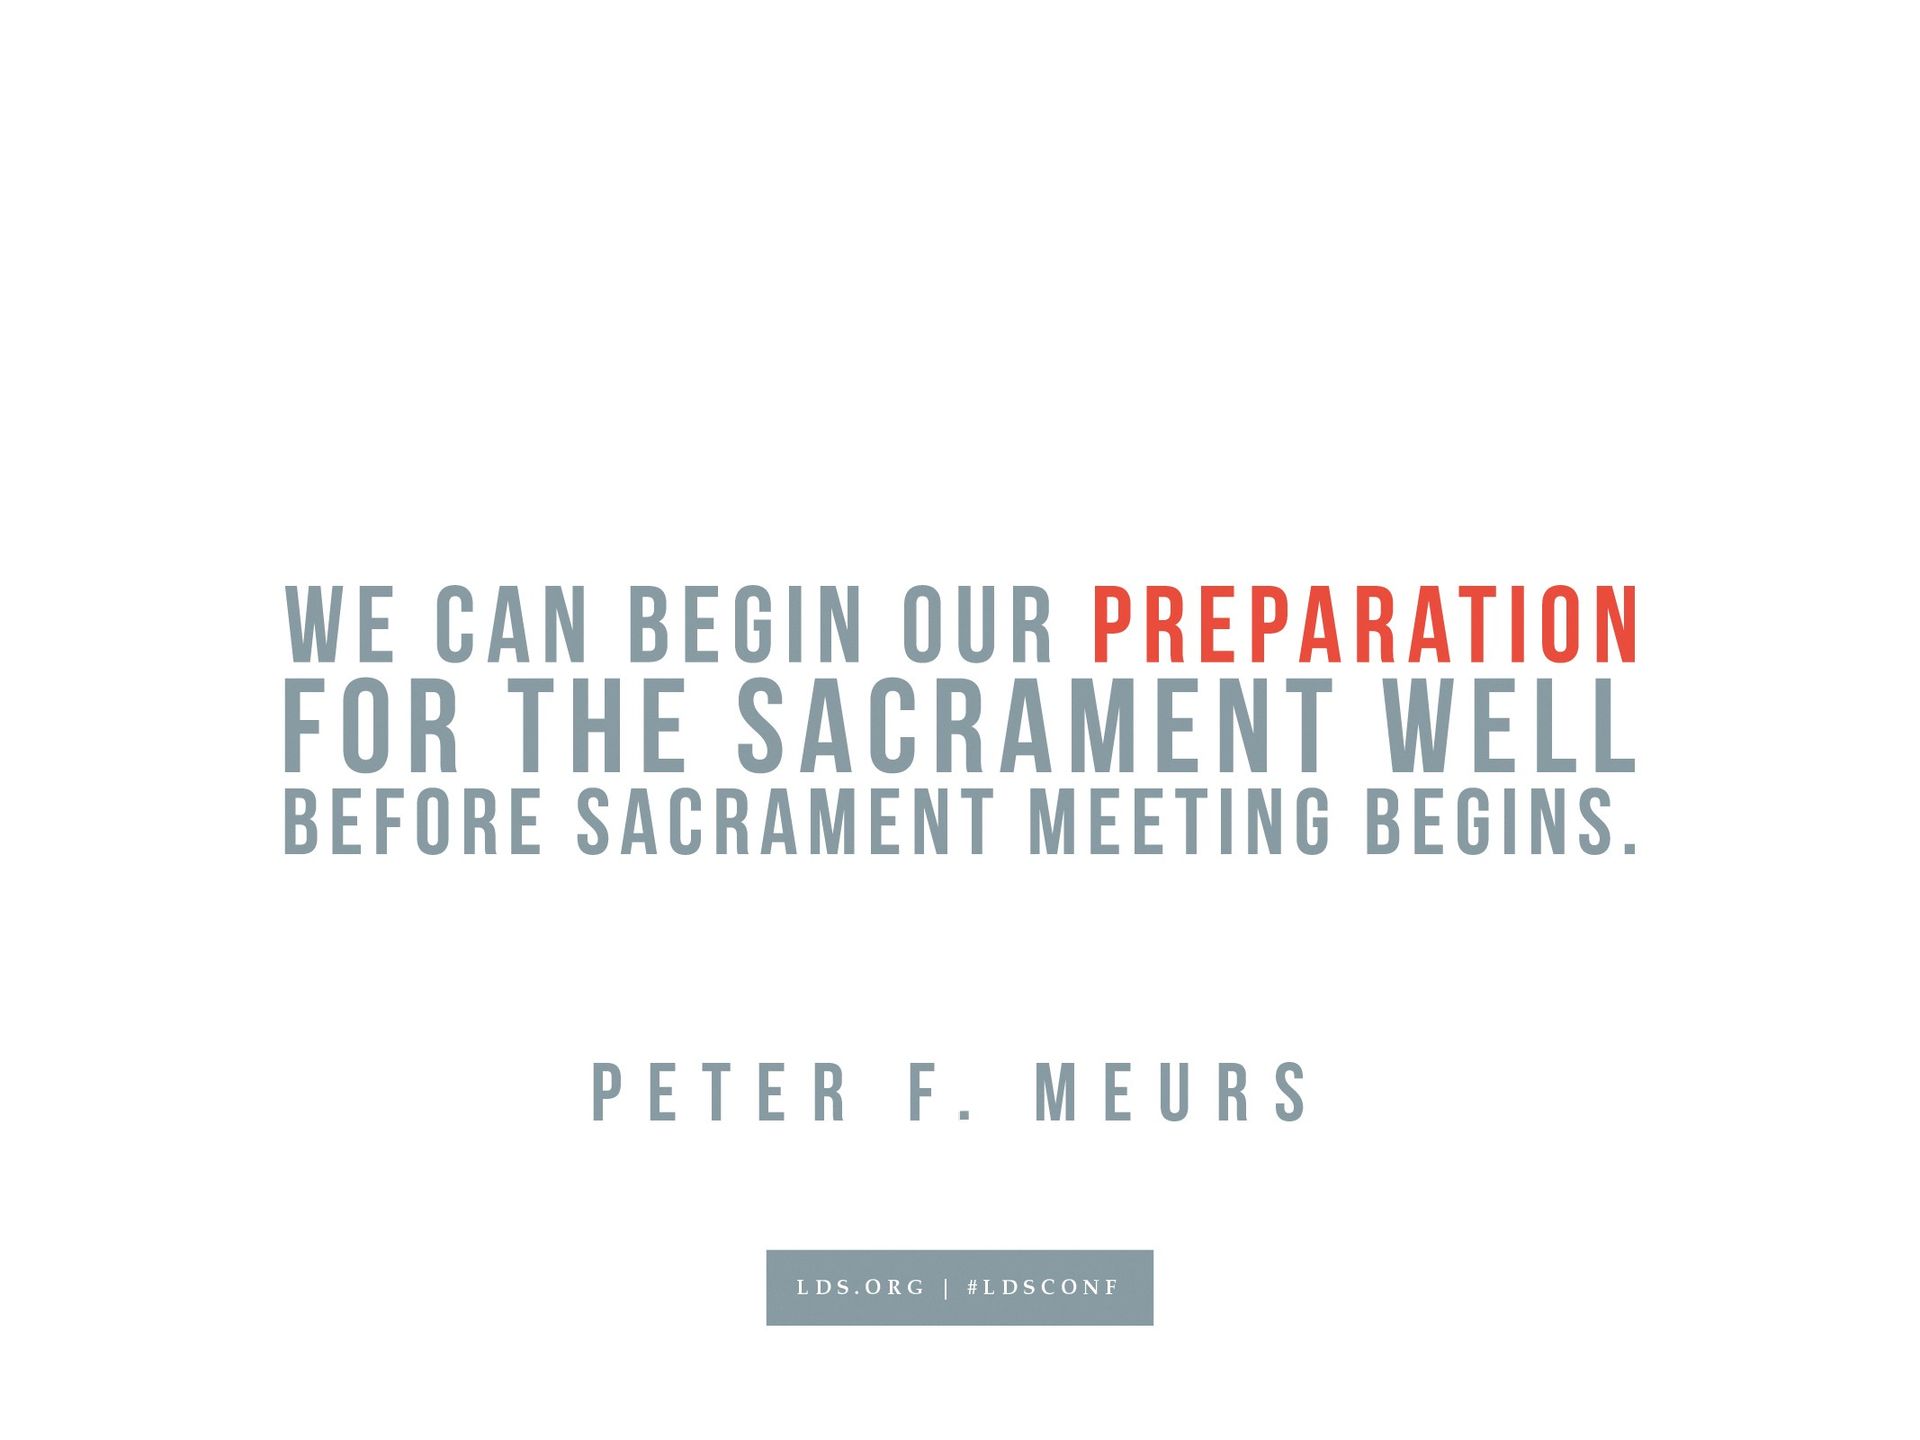 “We can begin our preparation for the sacrament well before sacrament meeting begins.”—Peter F. Meurs, “The Sacrament Can Help Us Become Holy”